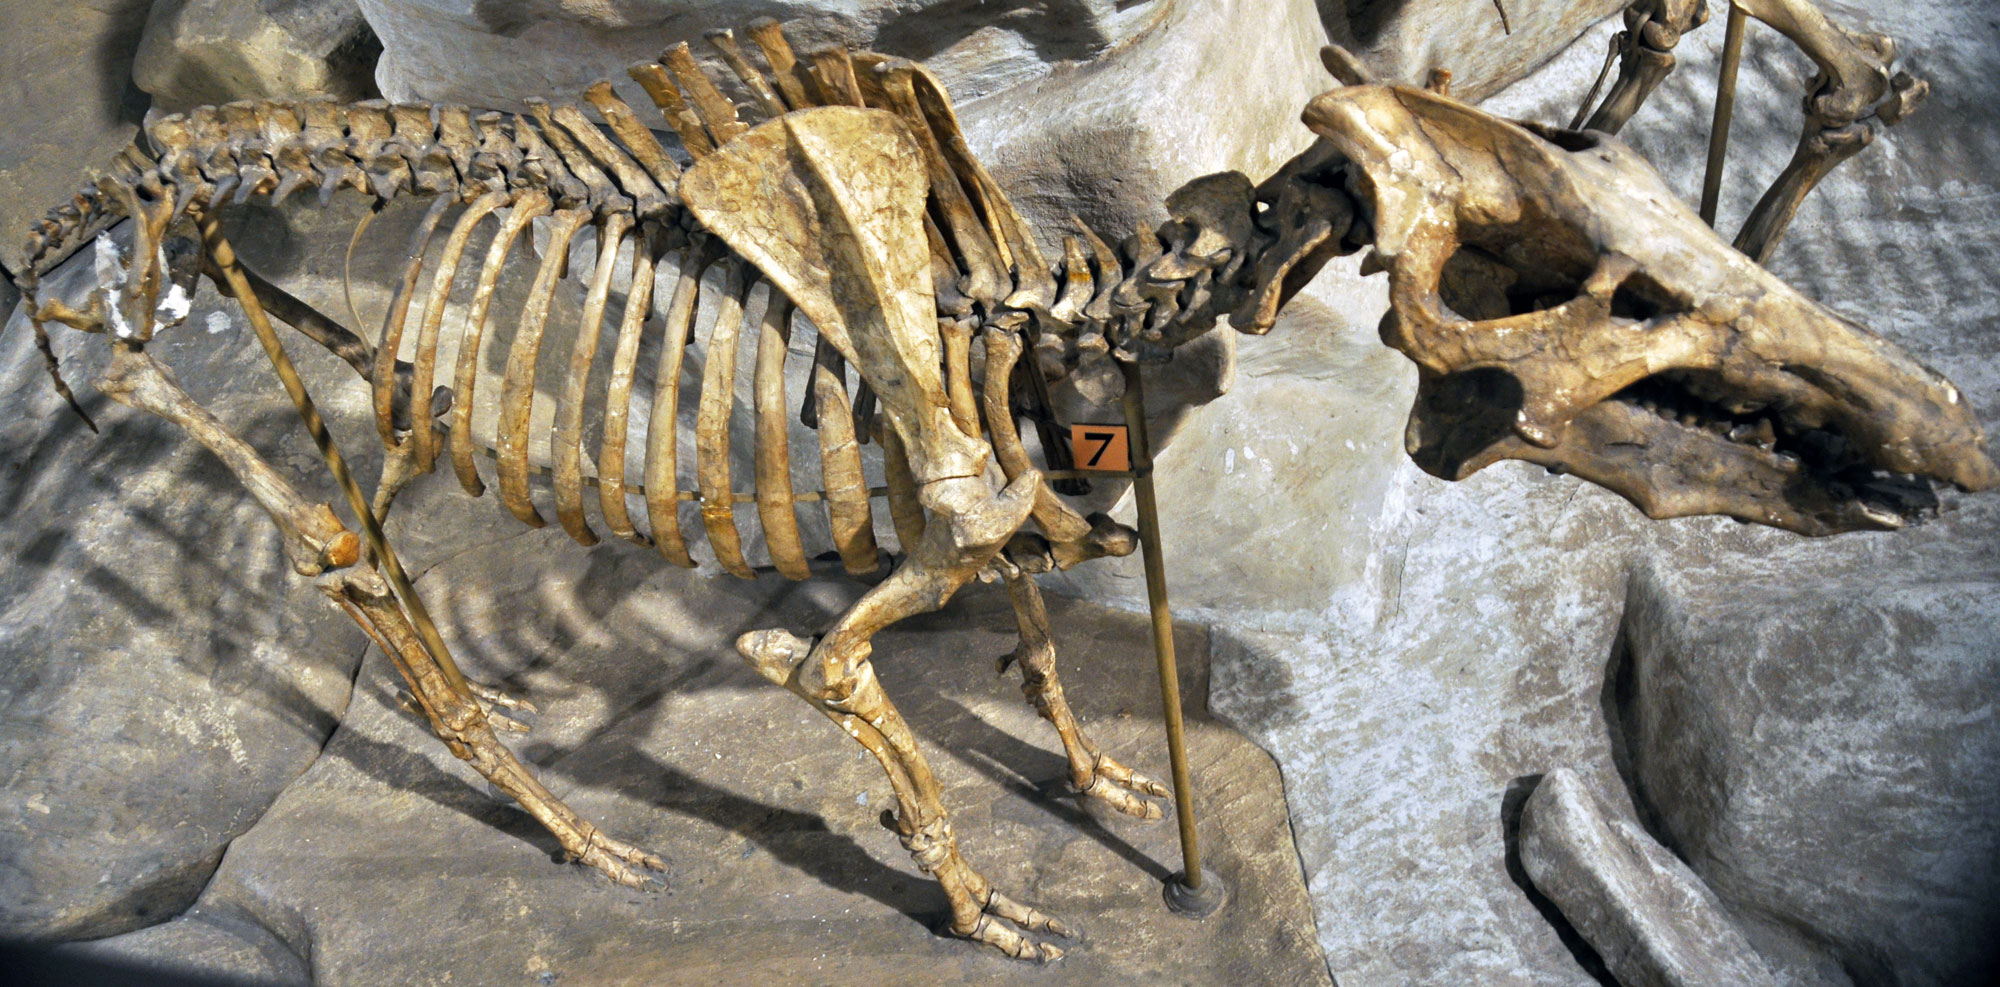 Photograph of the mounted skeleton of the hell pig Archaeotherium from the Paleogene of Colorado. The animal has two-toed feet, walked on all fours, had a large head, tall shoulders, and a short tail.